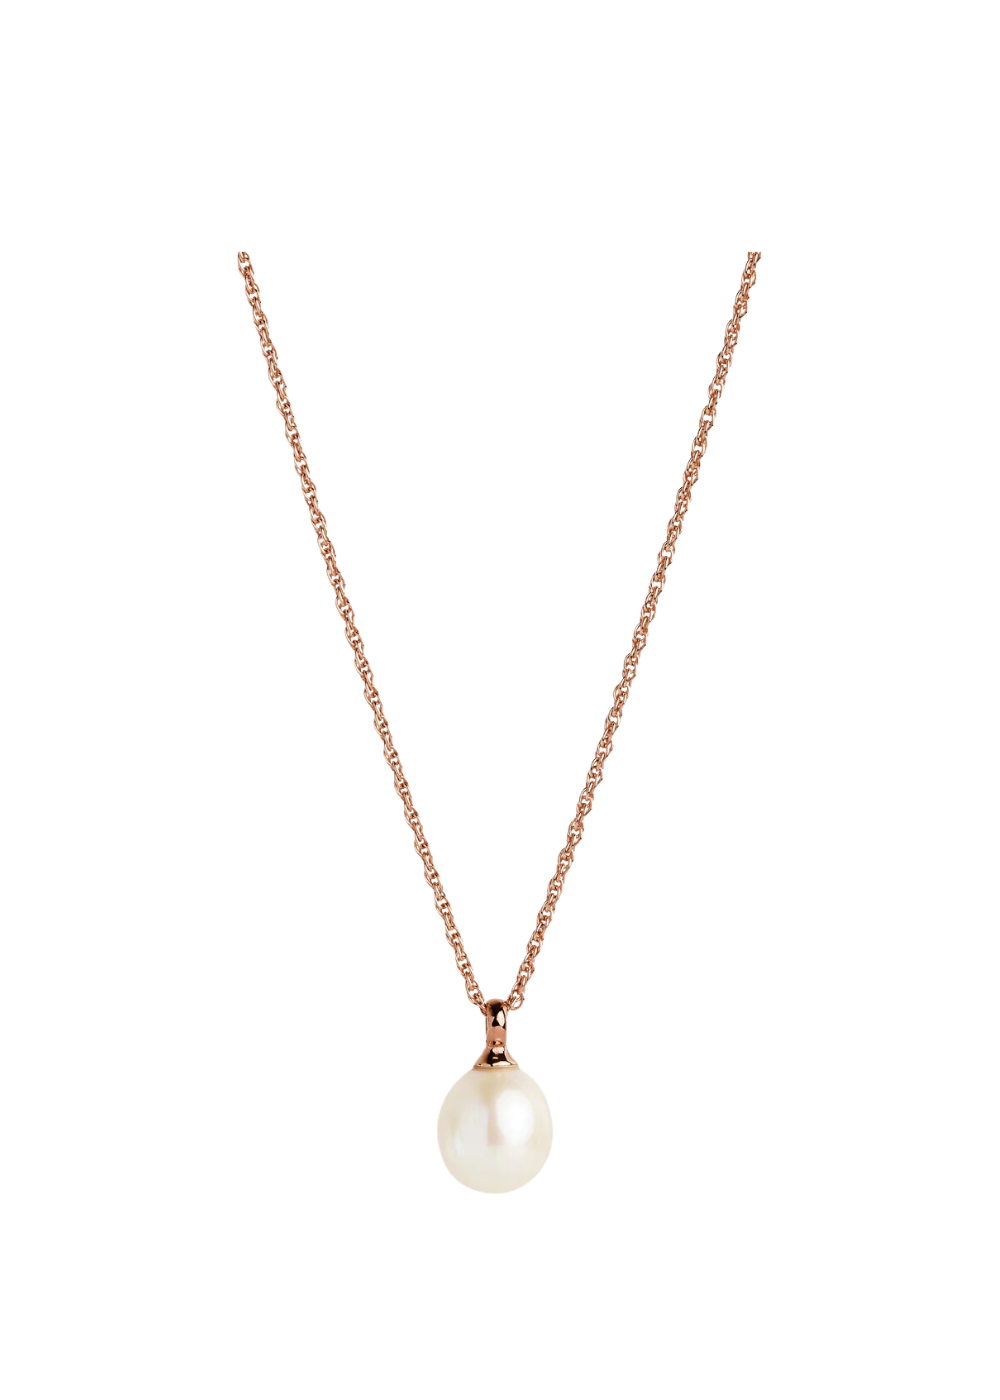 dew drop pearl necklace - rose gold